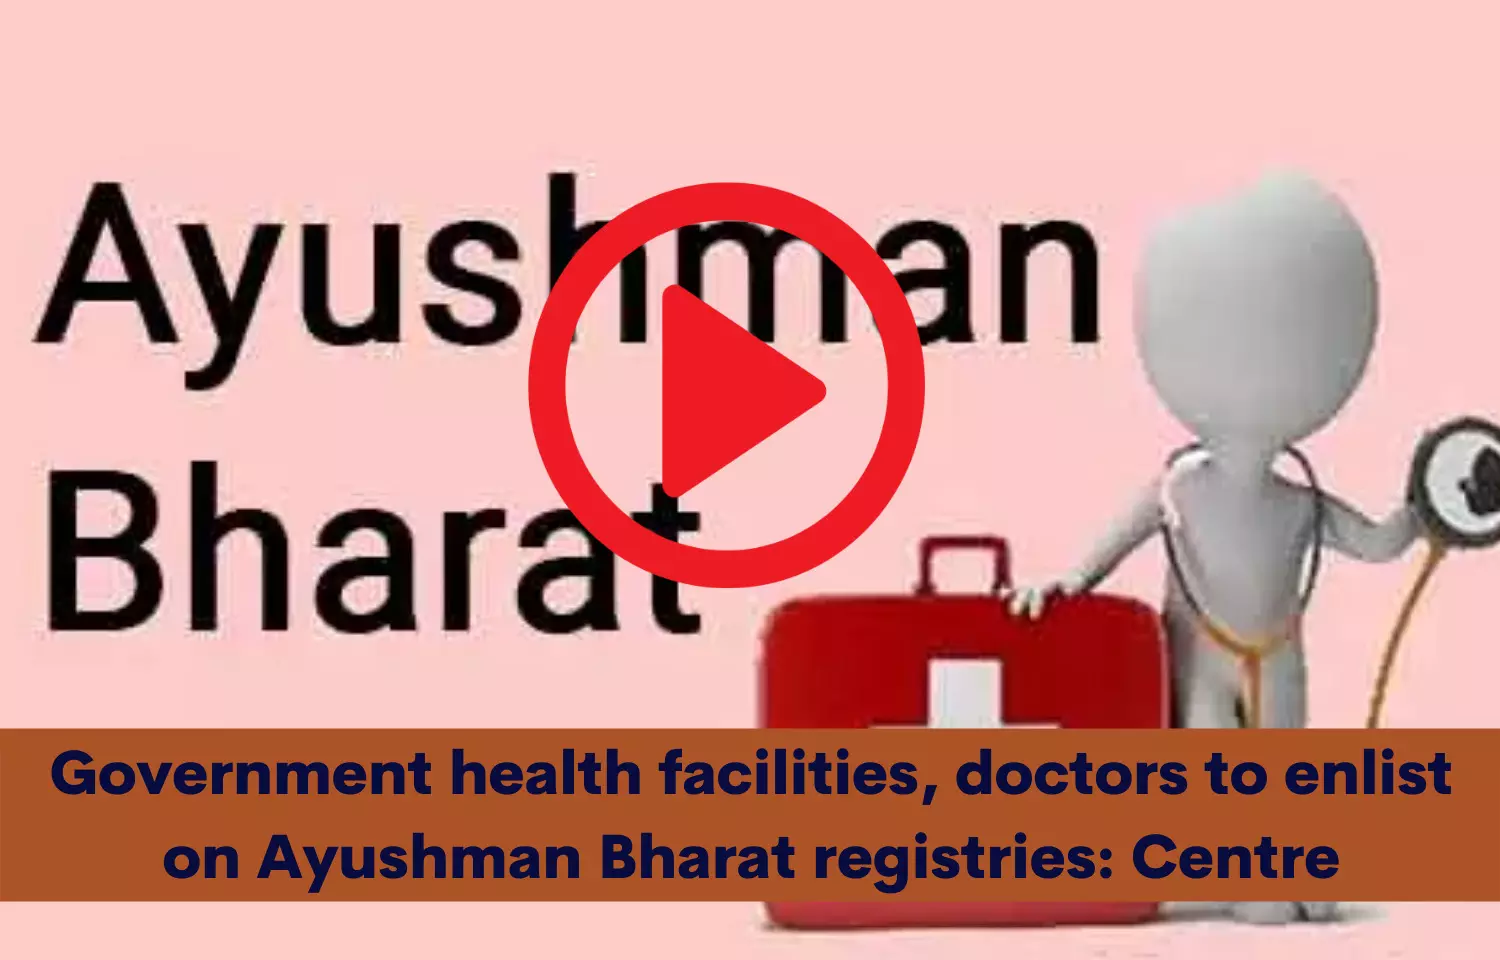 Government health facilities, doctors to enlist on Ayushman Bharat registries: Centre